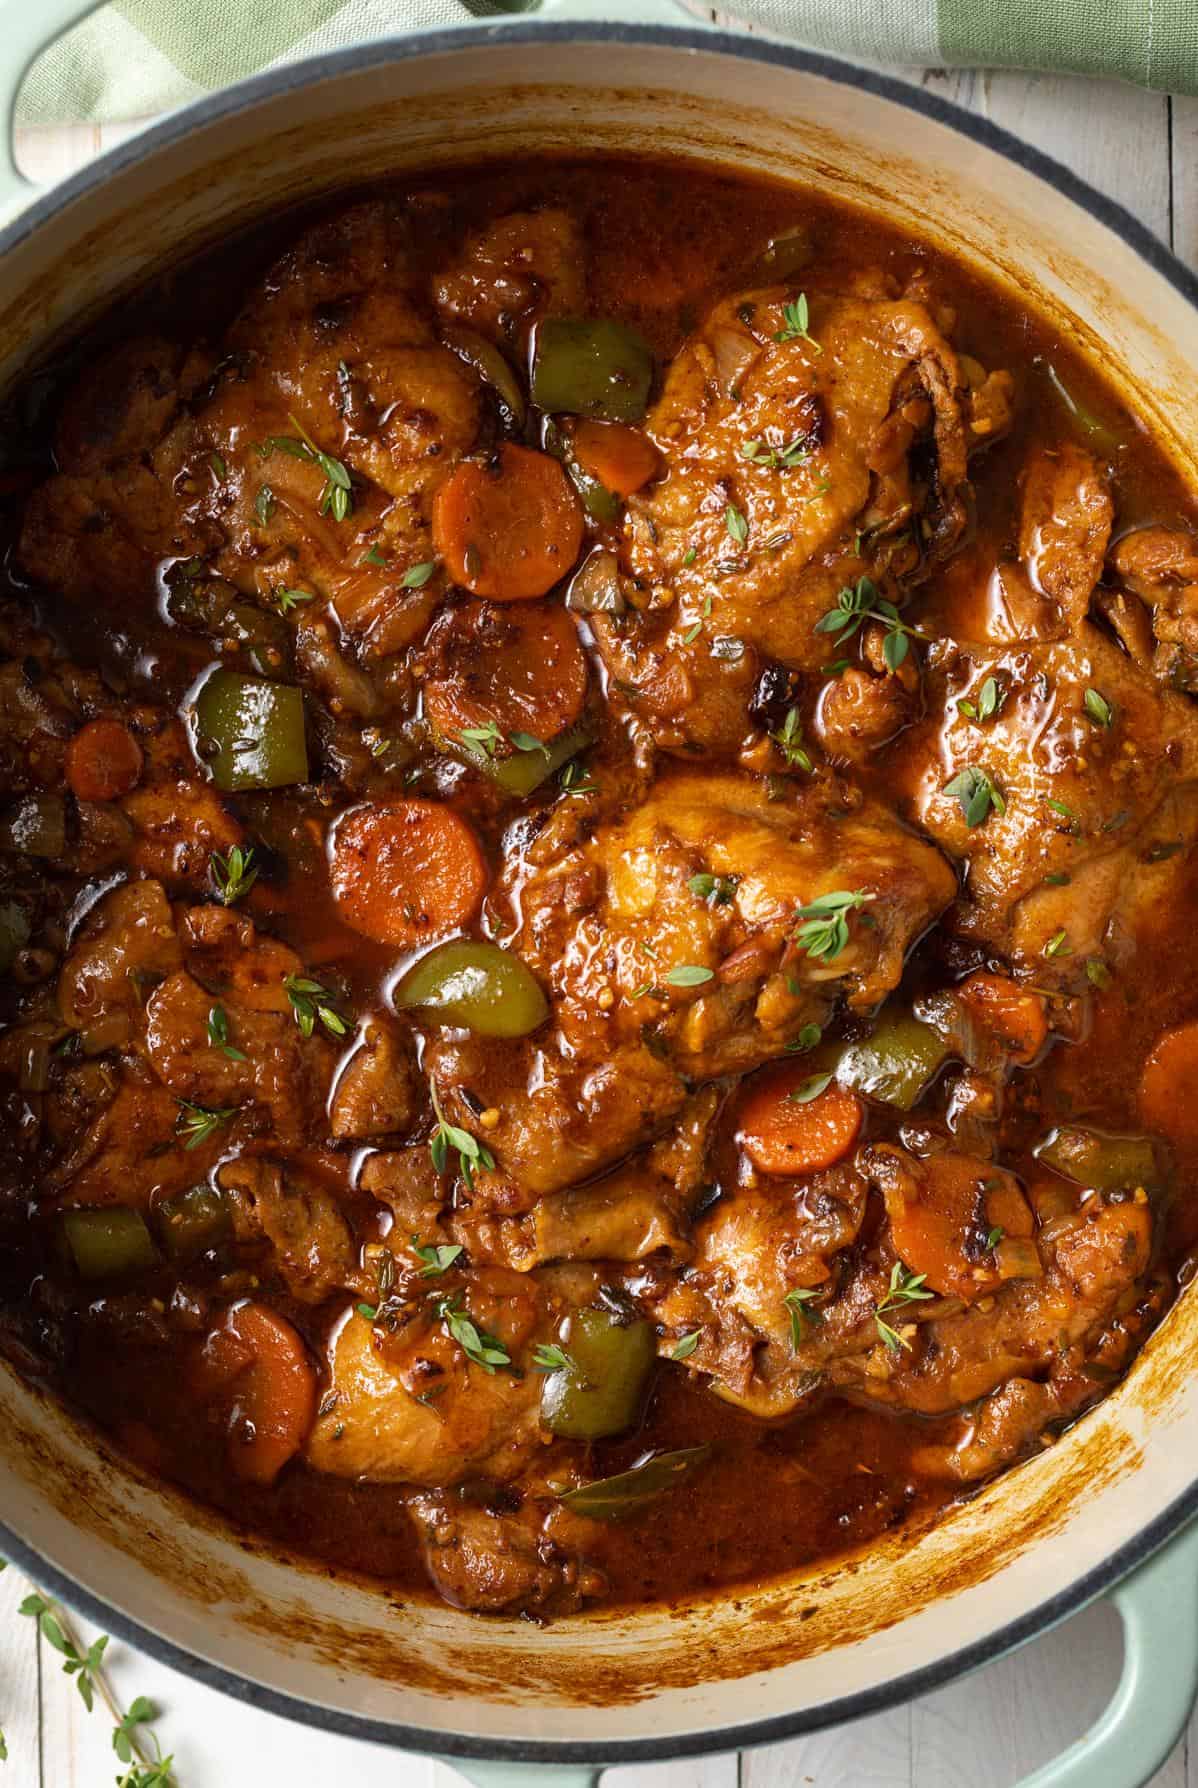  This chicken dish is a perfect comfort food on a cold winter day.